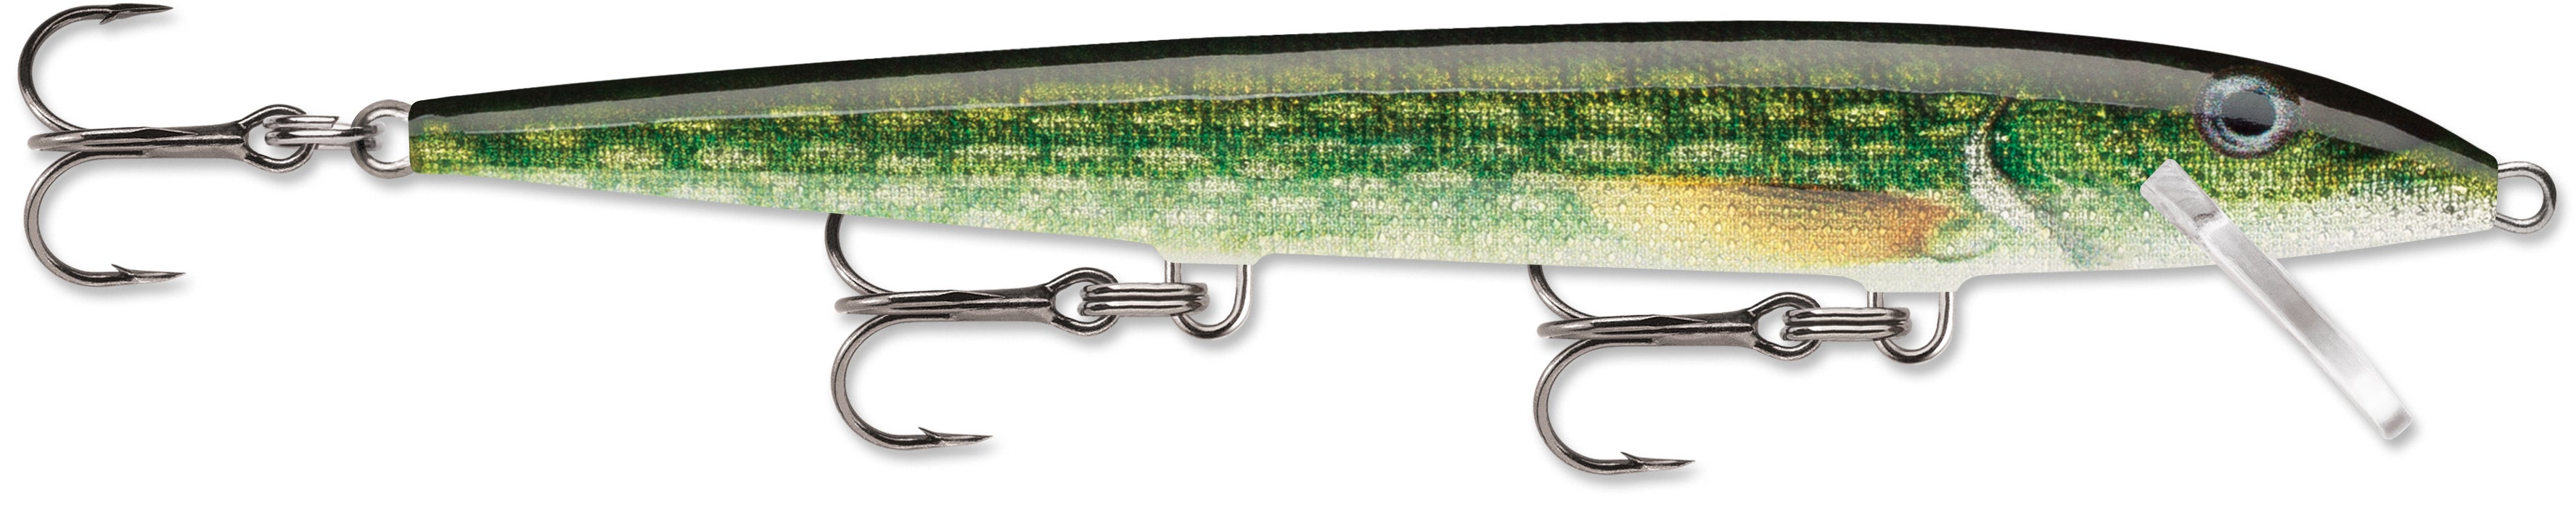 Rapala Original Floating 11 Lure - 4 3/8 Inches Live Pike